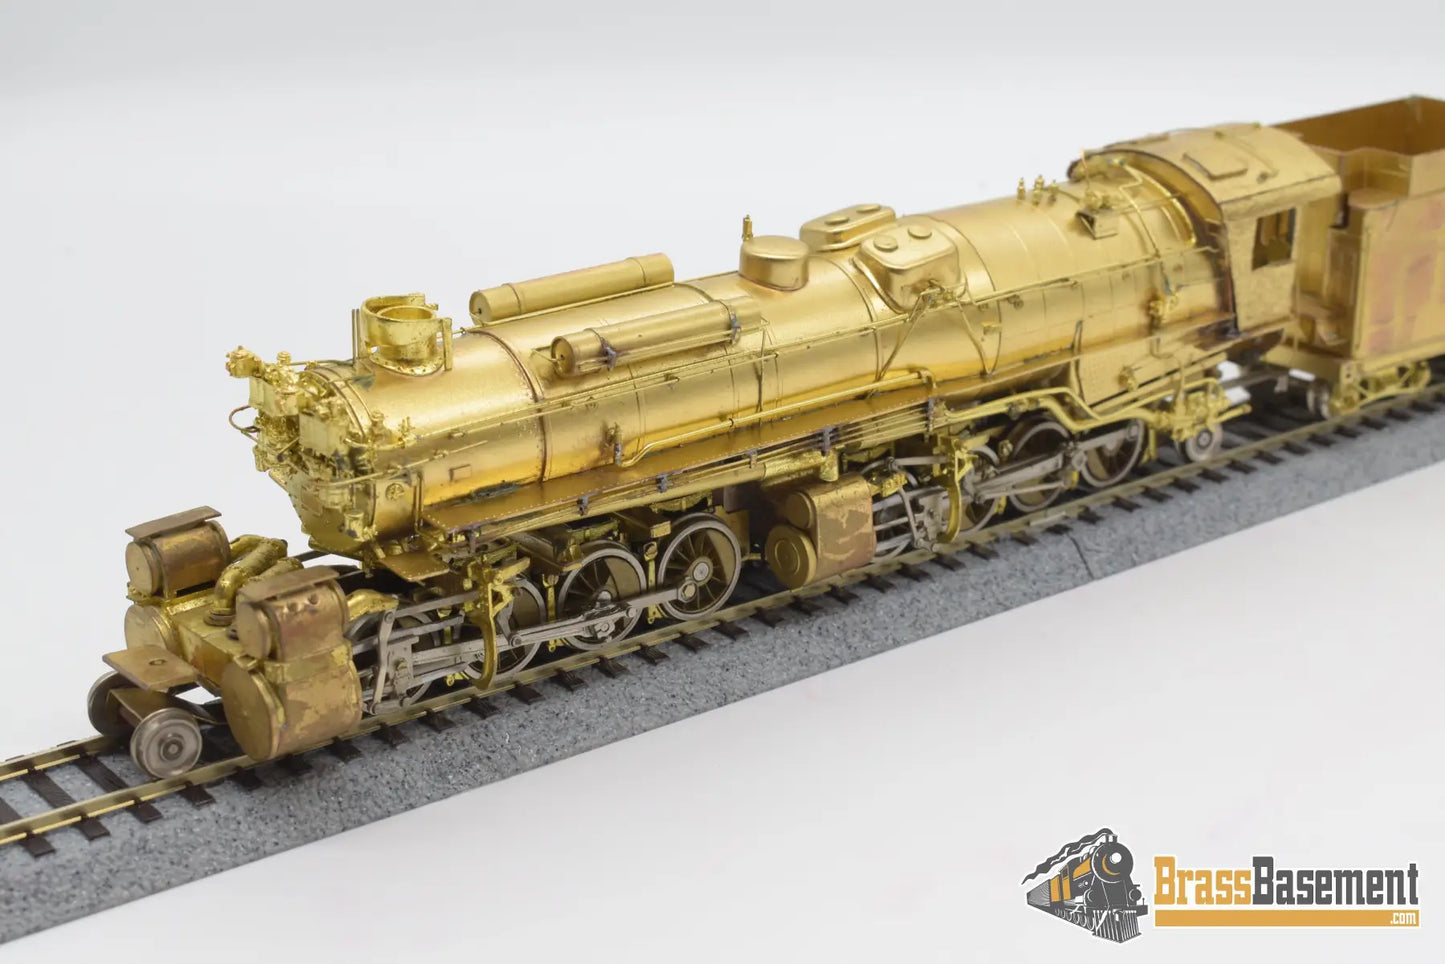 Ho Brass - Key Imports Drgw L - 96 2 - 8 - 8 - 2 Unpainted And Runs Well Steam